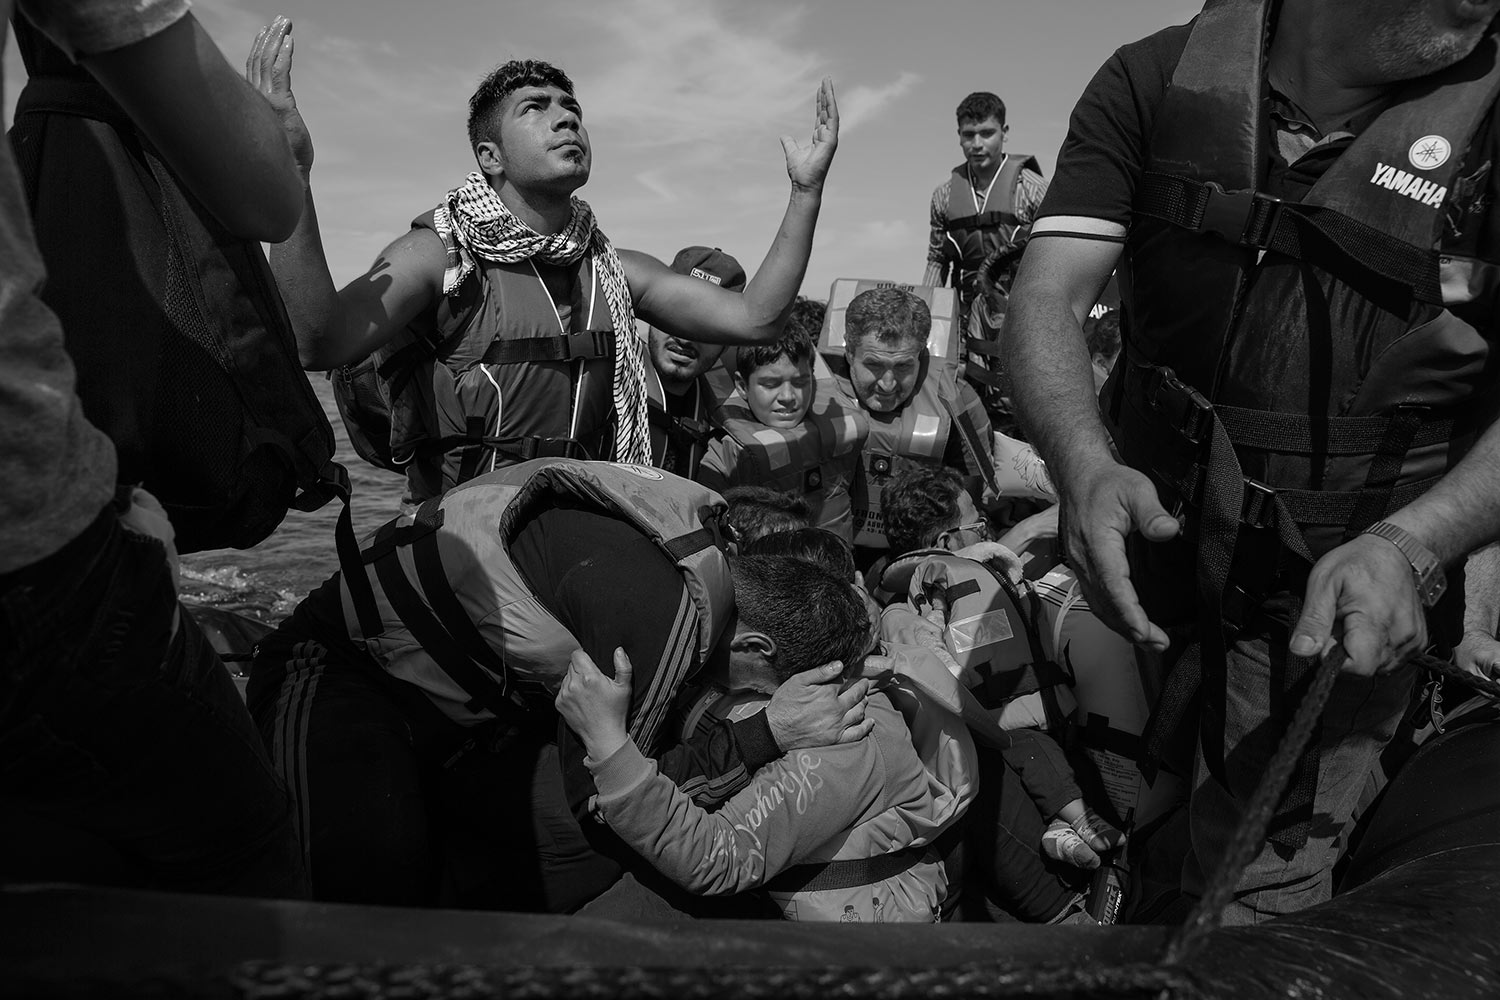 Refugees celebrate after arriving on the beach in Lesbos, Greece. Thousands of migrants each day set out from nearby Turkey for the Greek island, riding in barely seaworthy rubber boats. Some don’t make it, September 26, 2015.James Nachtwey for TIME